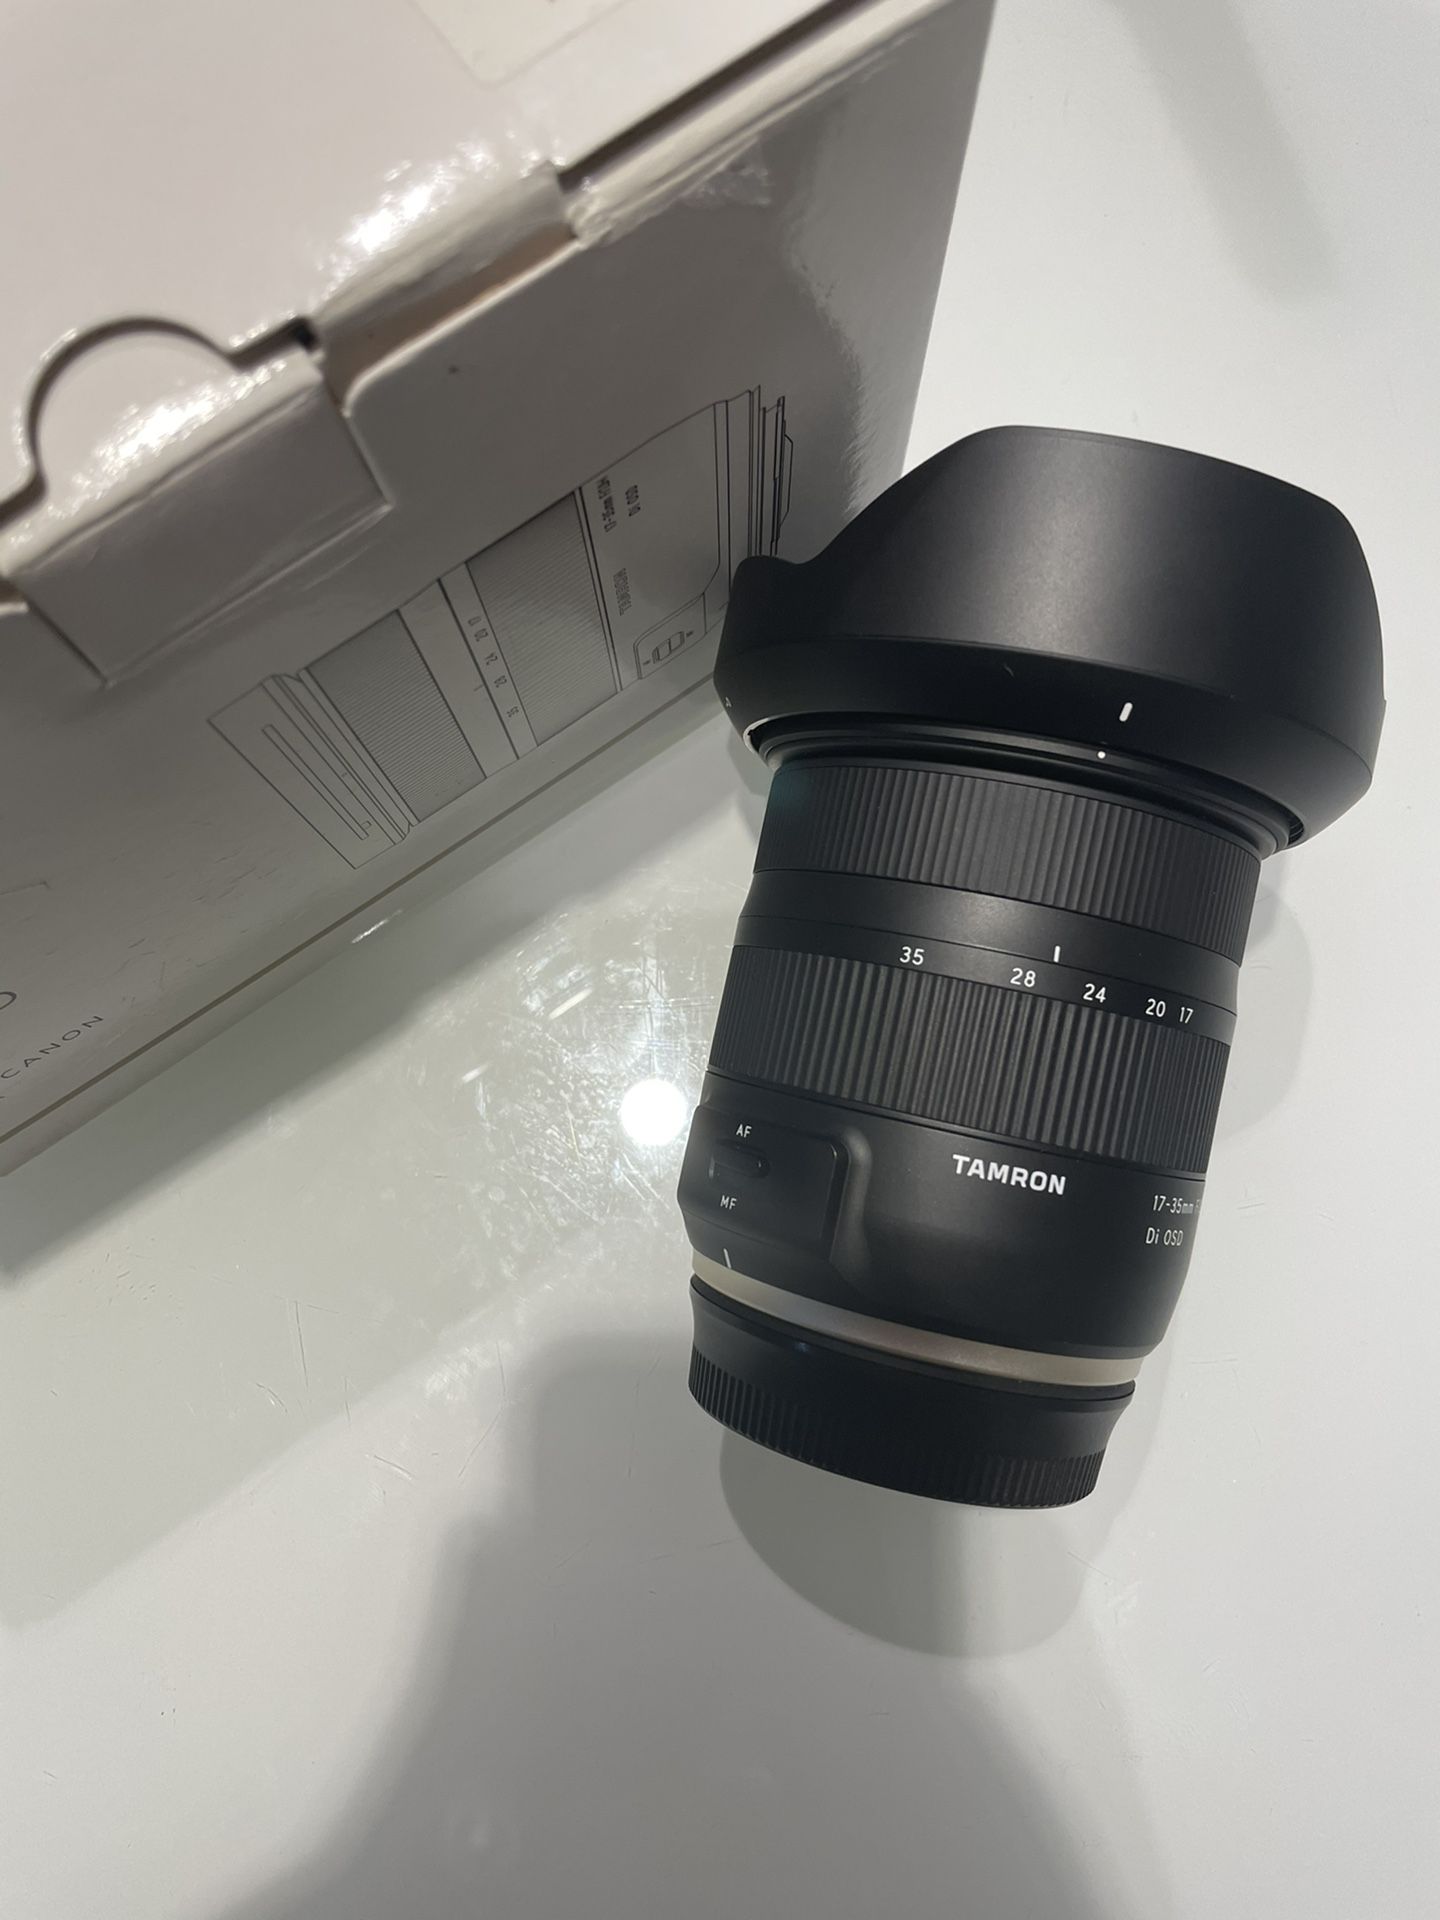 Tamron 17-35mm f2.8-4 lens for Canon